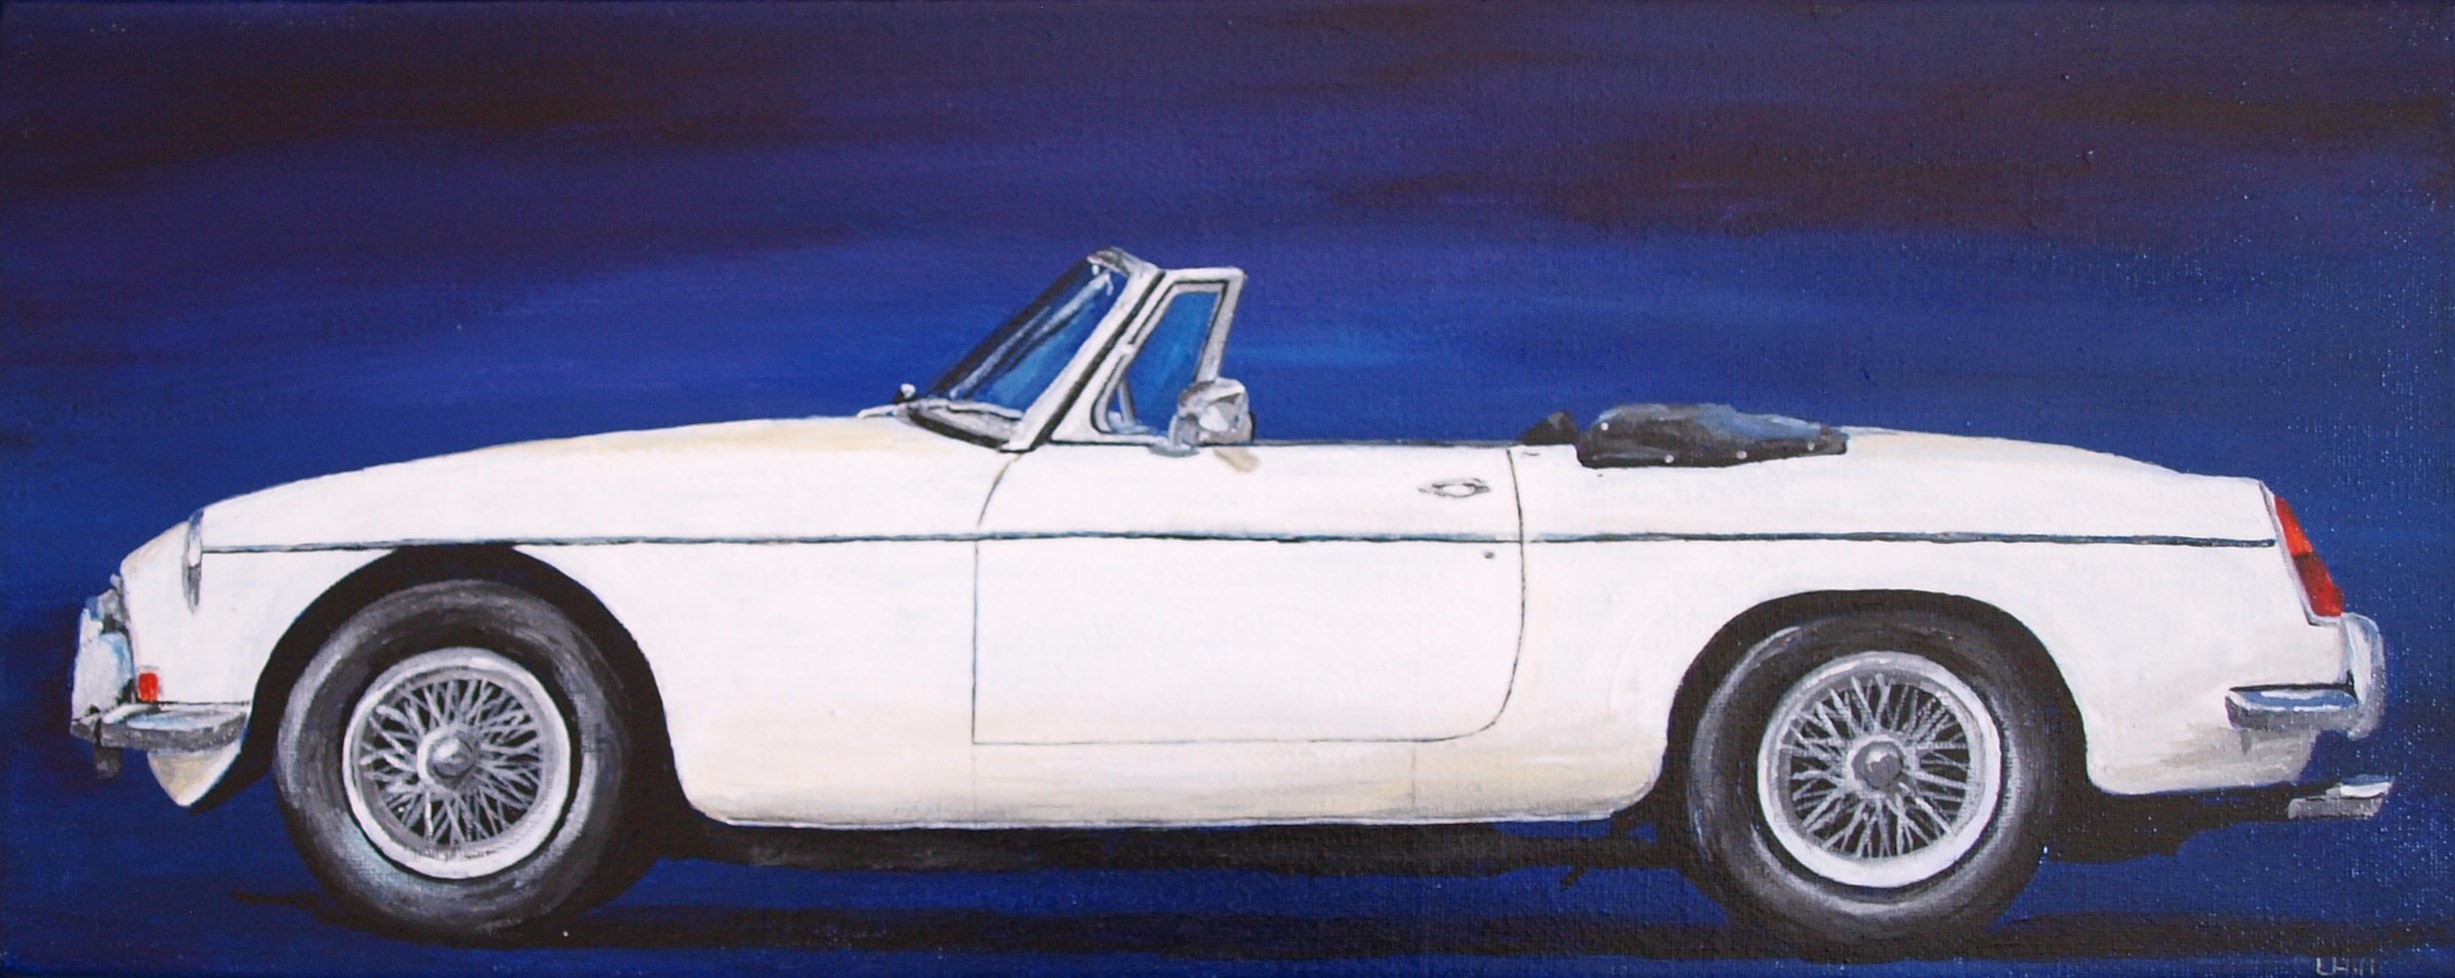 MG B acrylic painting by Louisa Hill